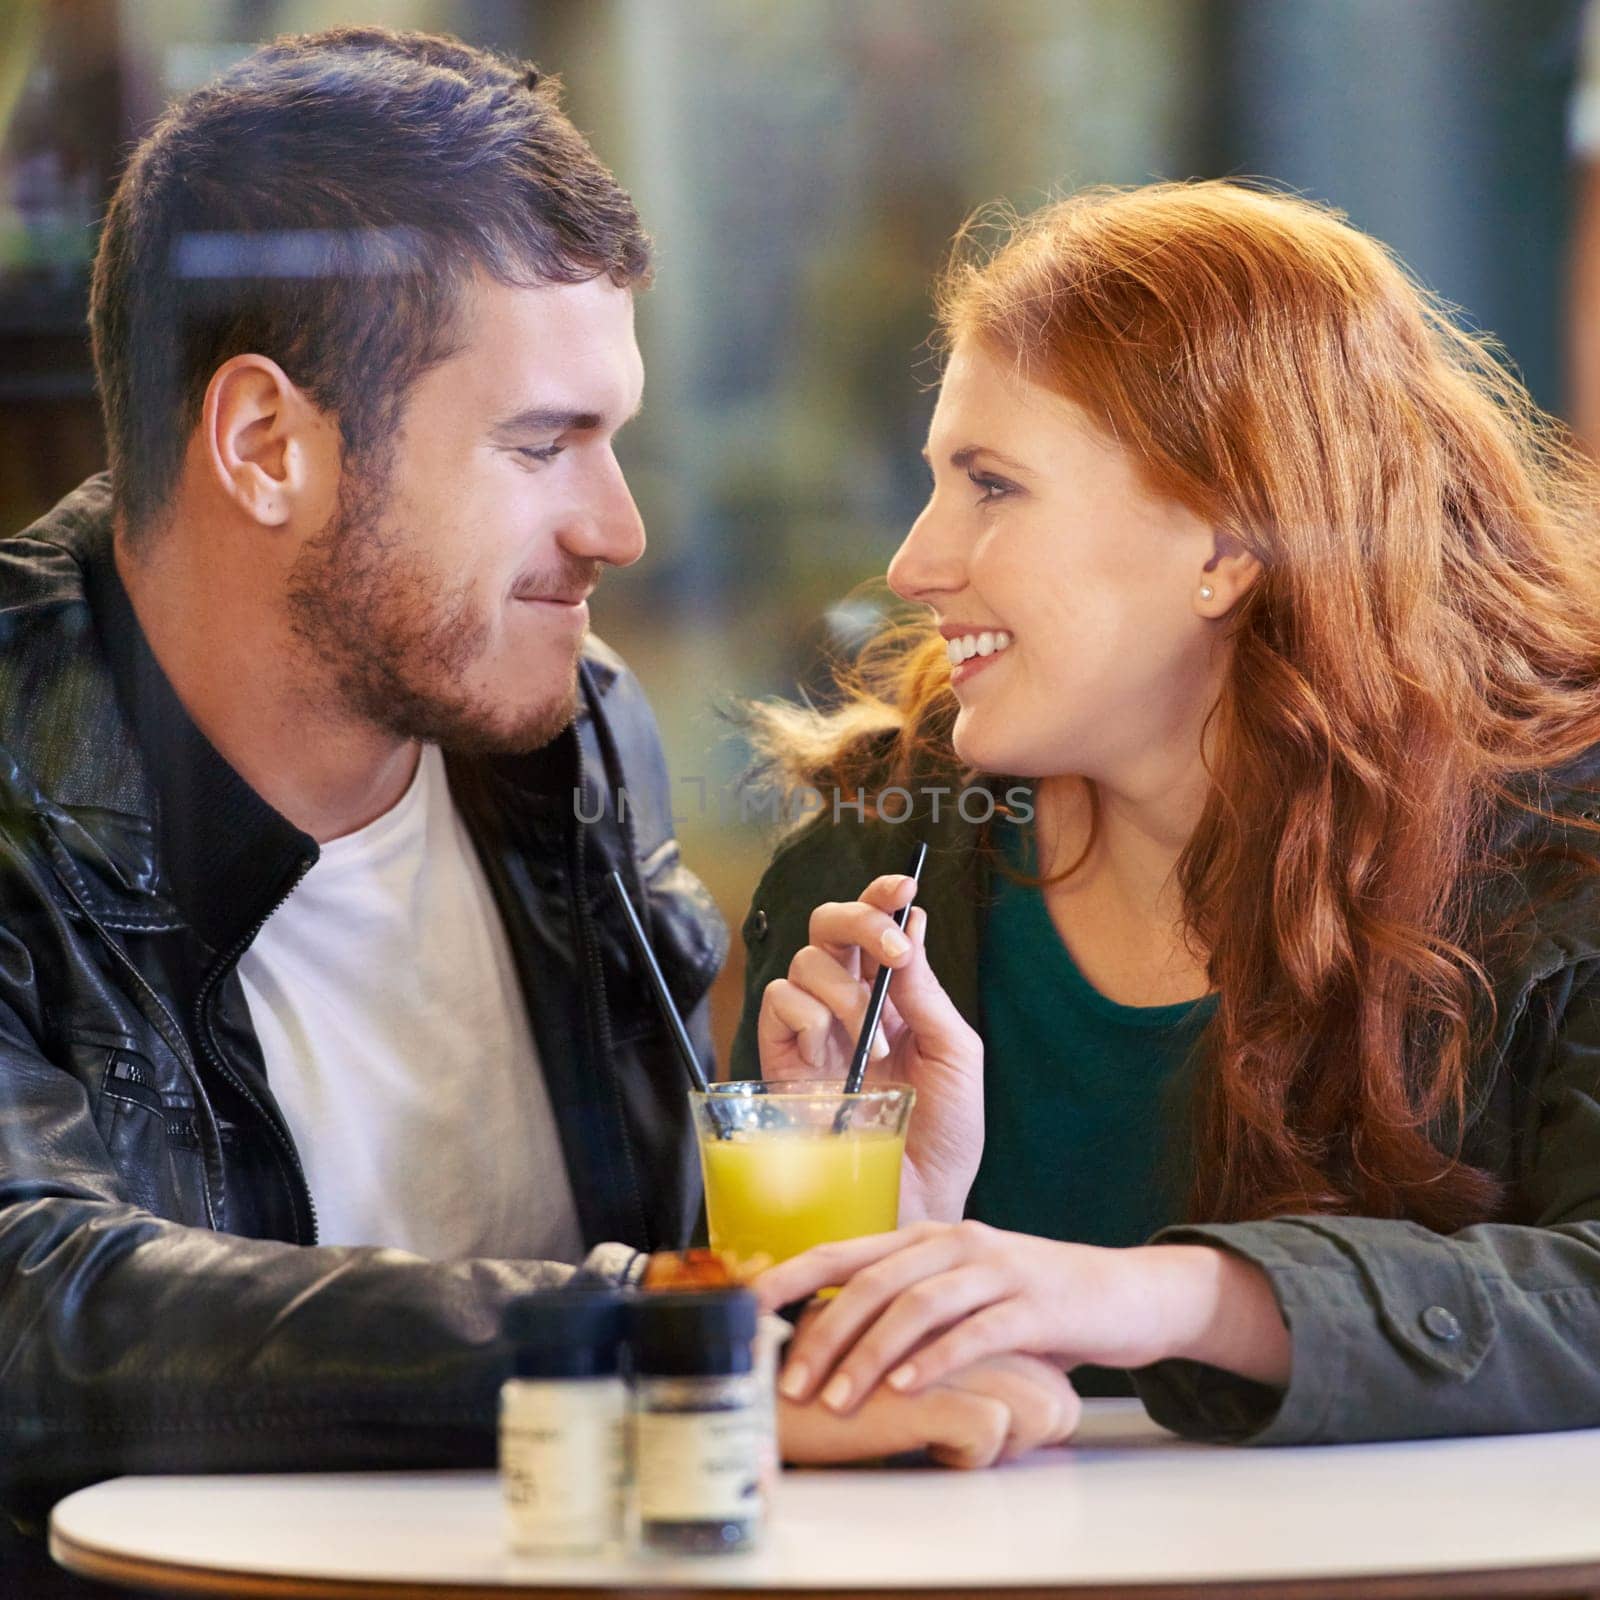 Couple, holding hands and juice in cafe happy with smile, romance and affection on anniversary date. Romantic, man and woman in restaurant bonding with drink or beverage and joy in relationship.